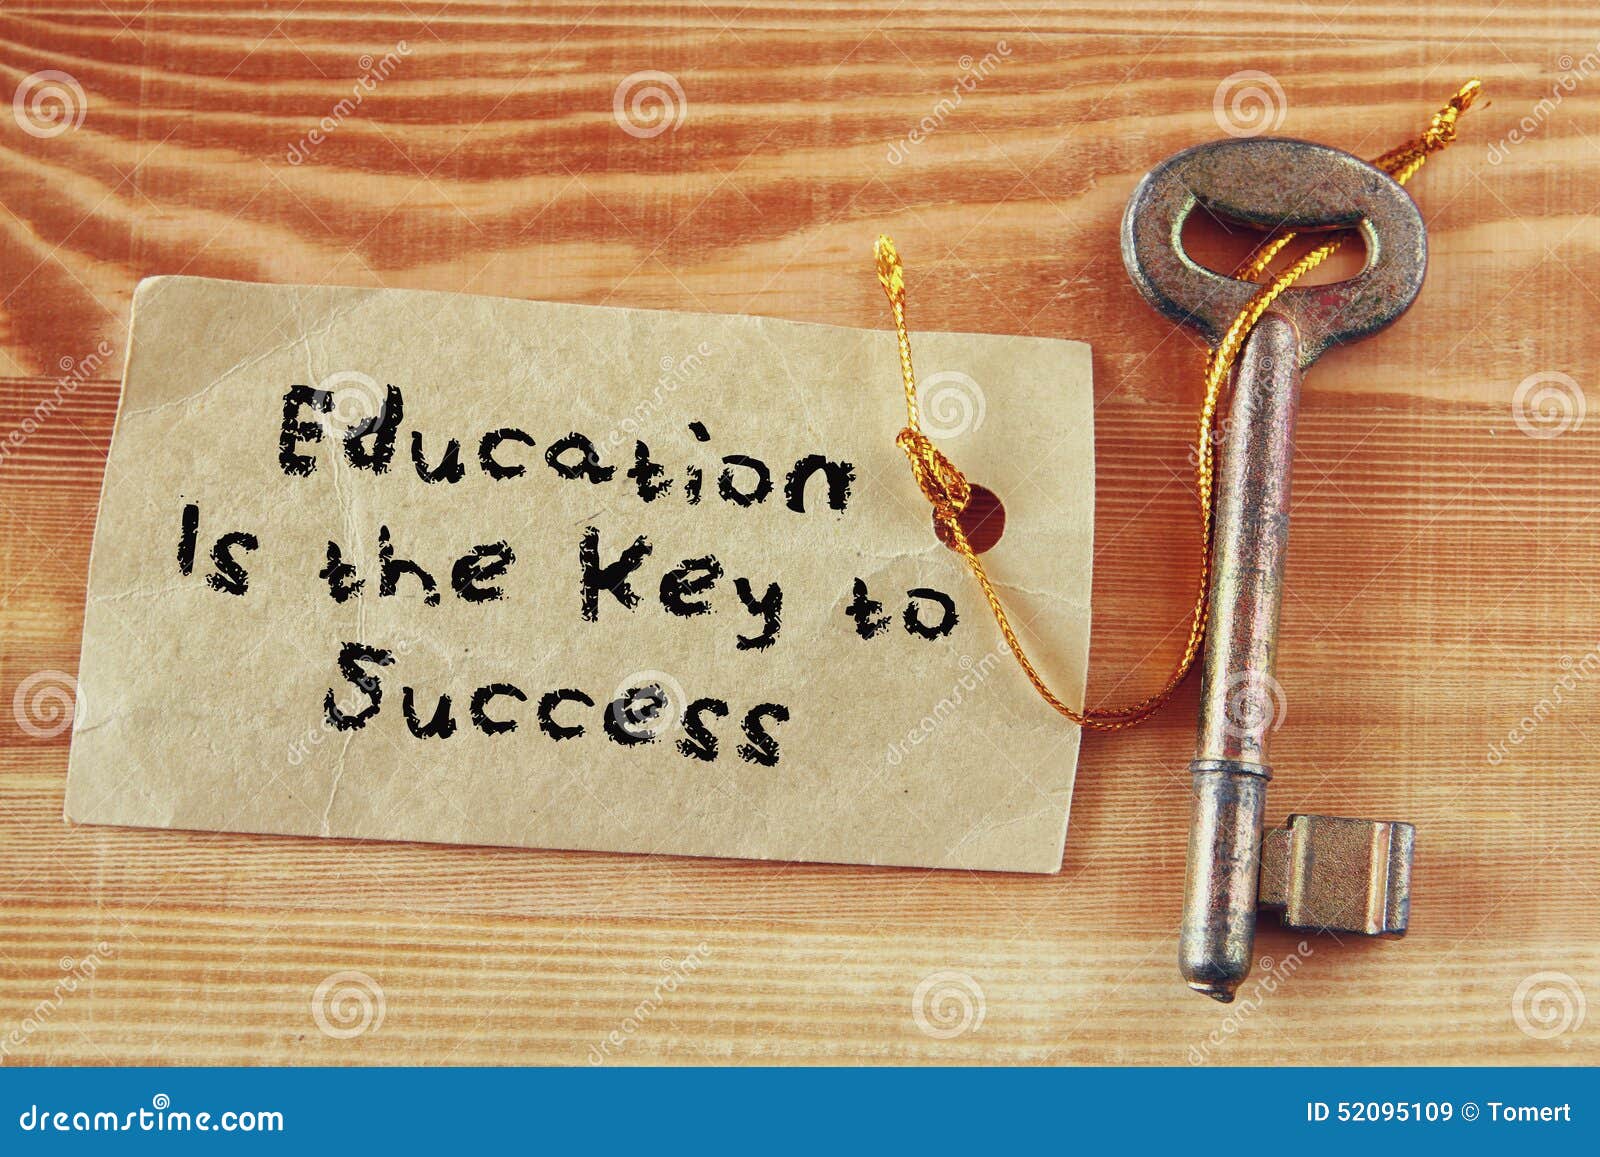 is education the only key to success